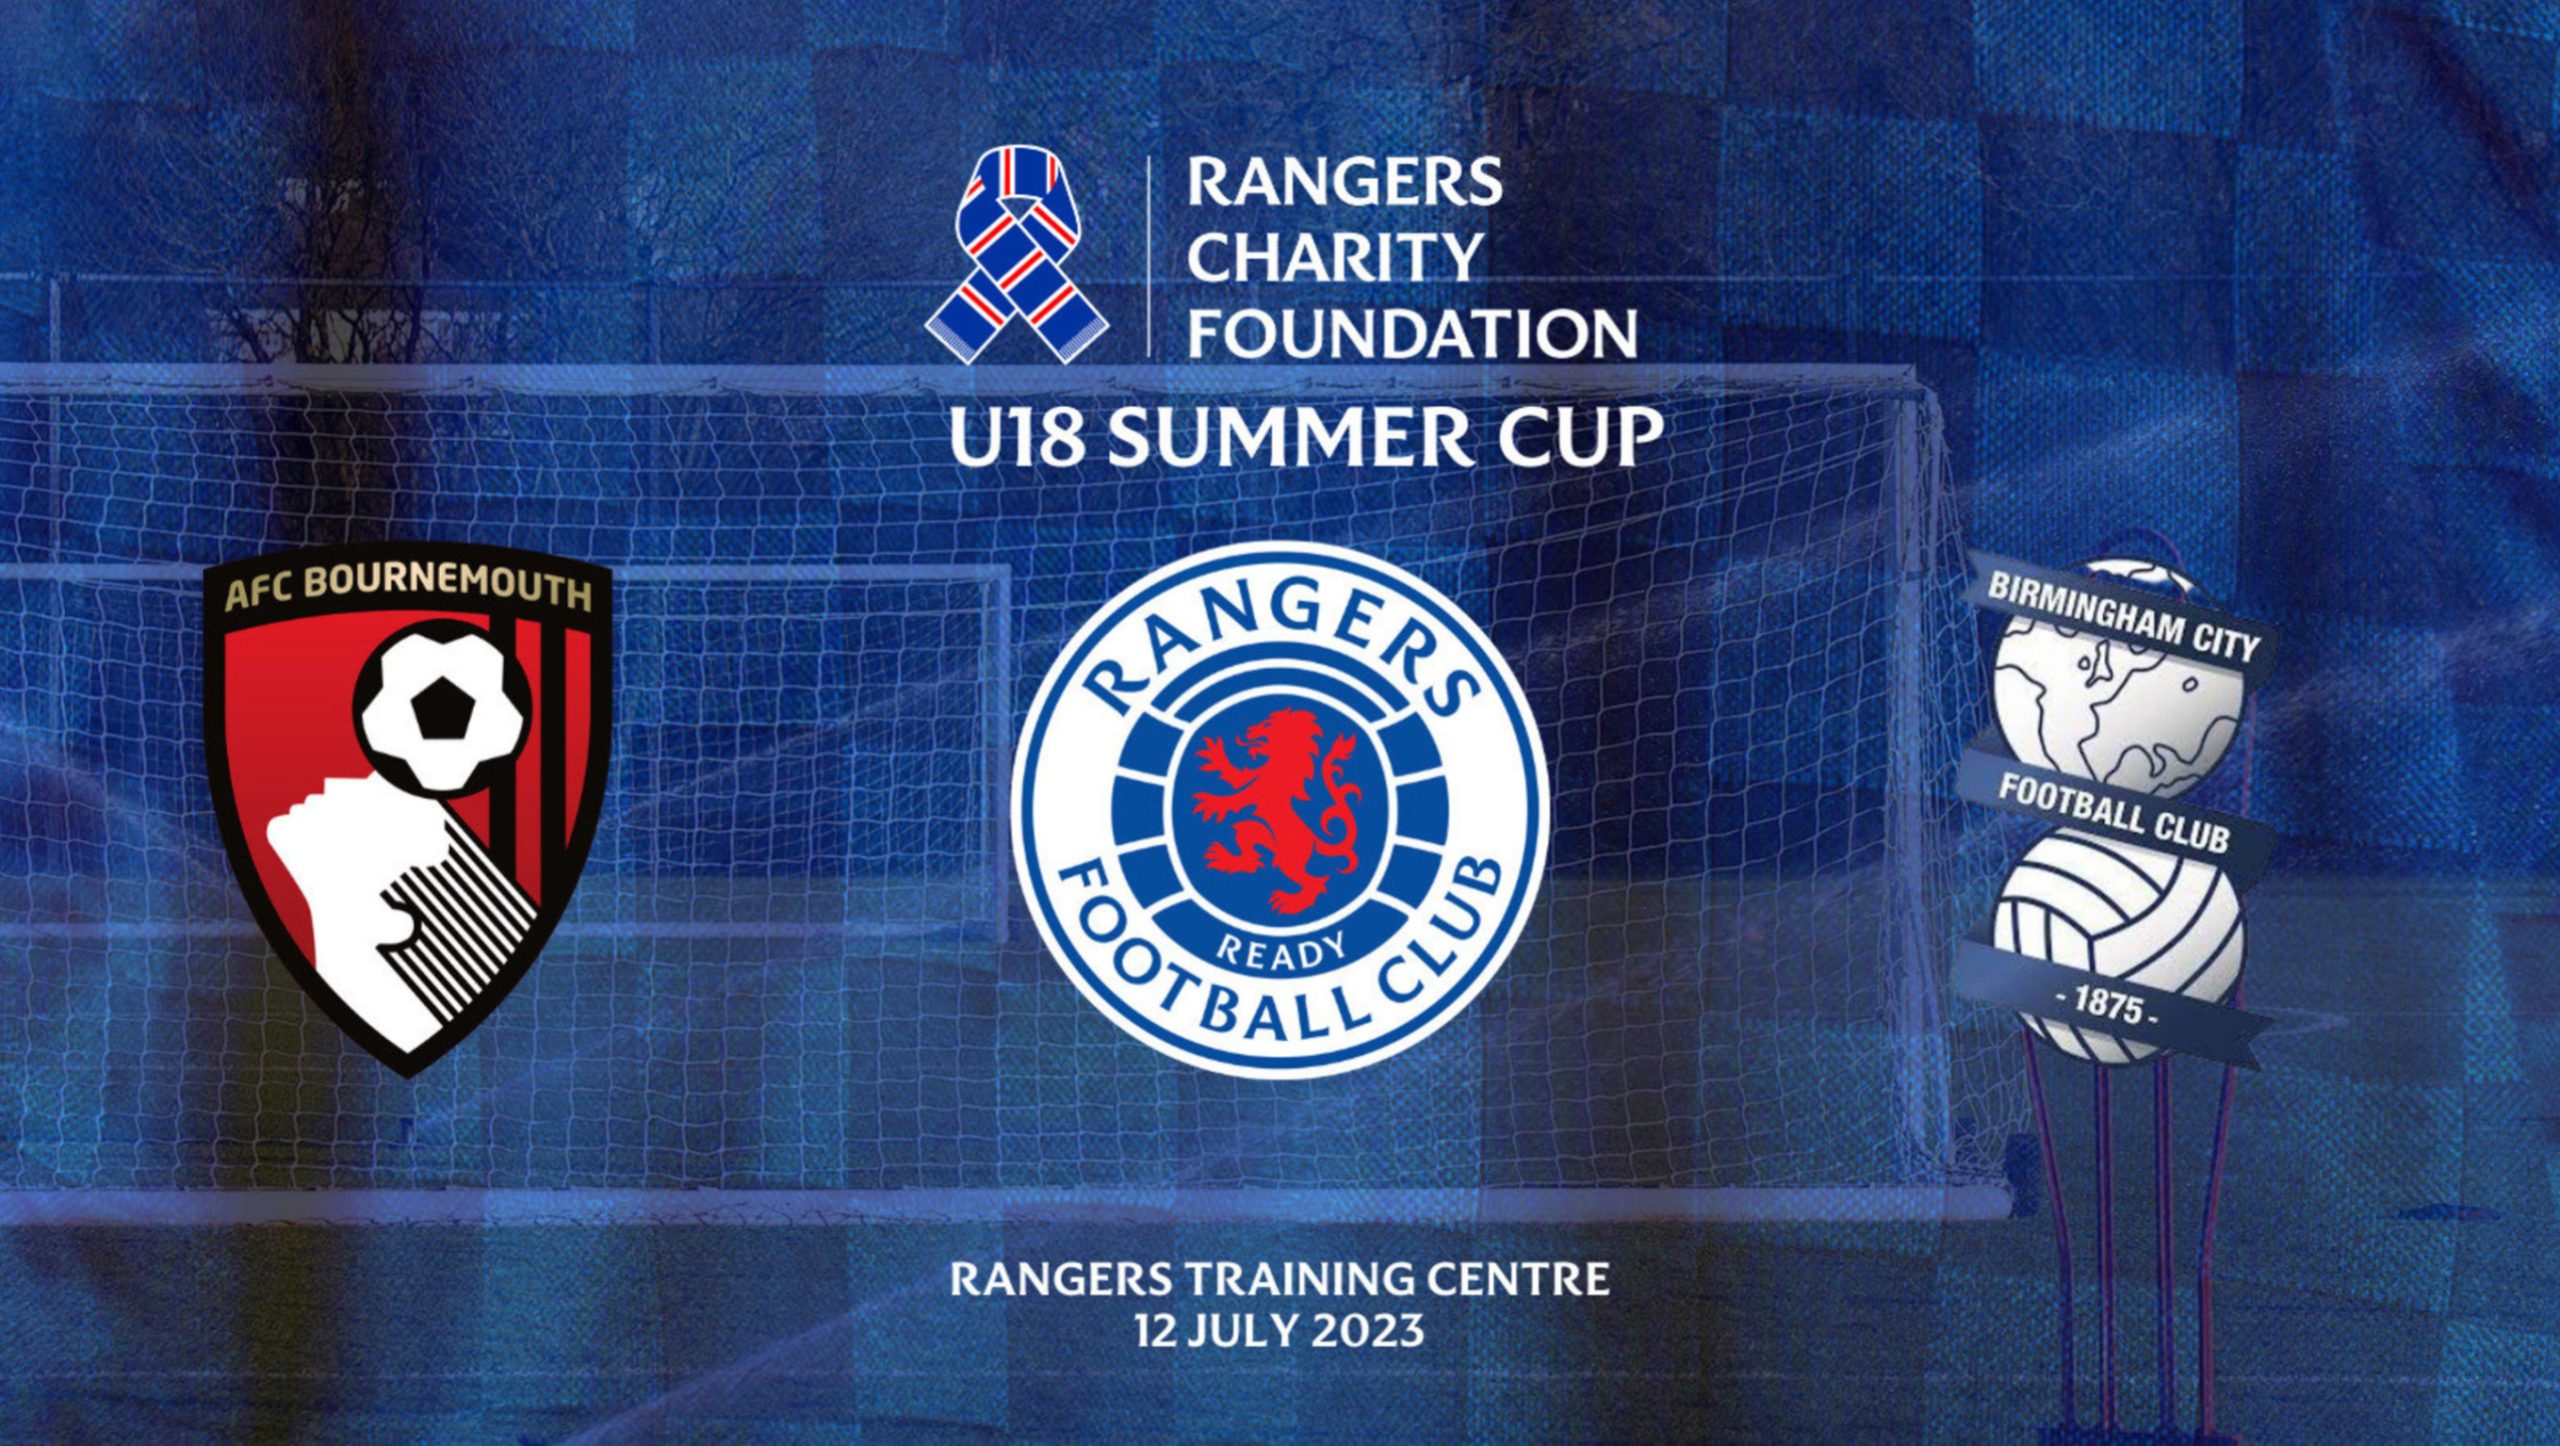 Rangers Charity Foundation U18 Summer Cup Is A Success For The Second Year